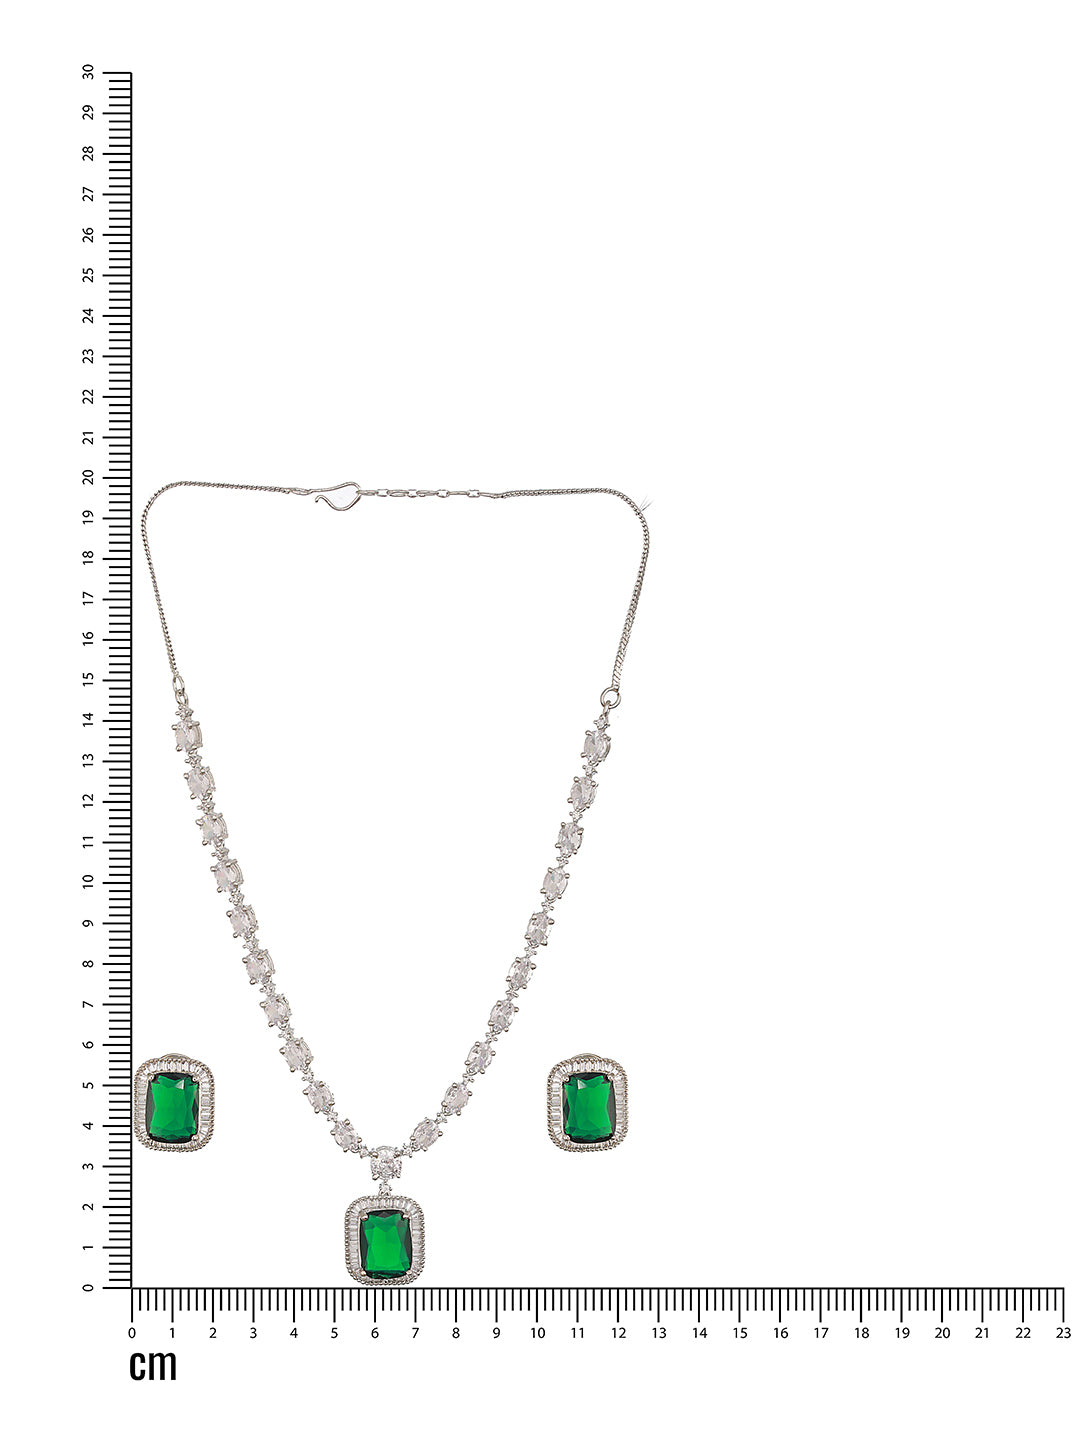 JAZZ AND SIZZLE Rhodium-Plated Green American Diamond Studded Handcrafted Jewelry Set (Copy) - Jazzandsizzle